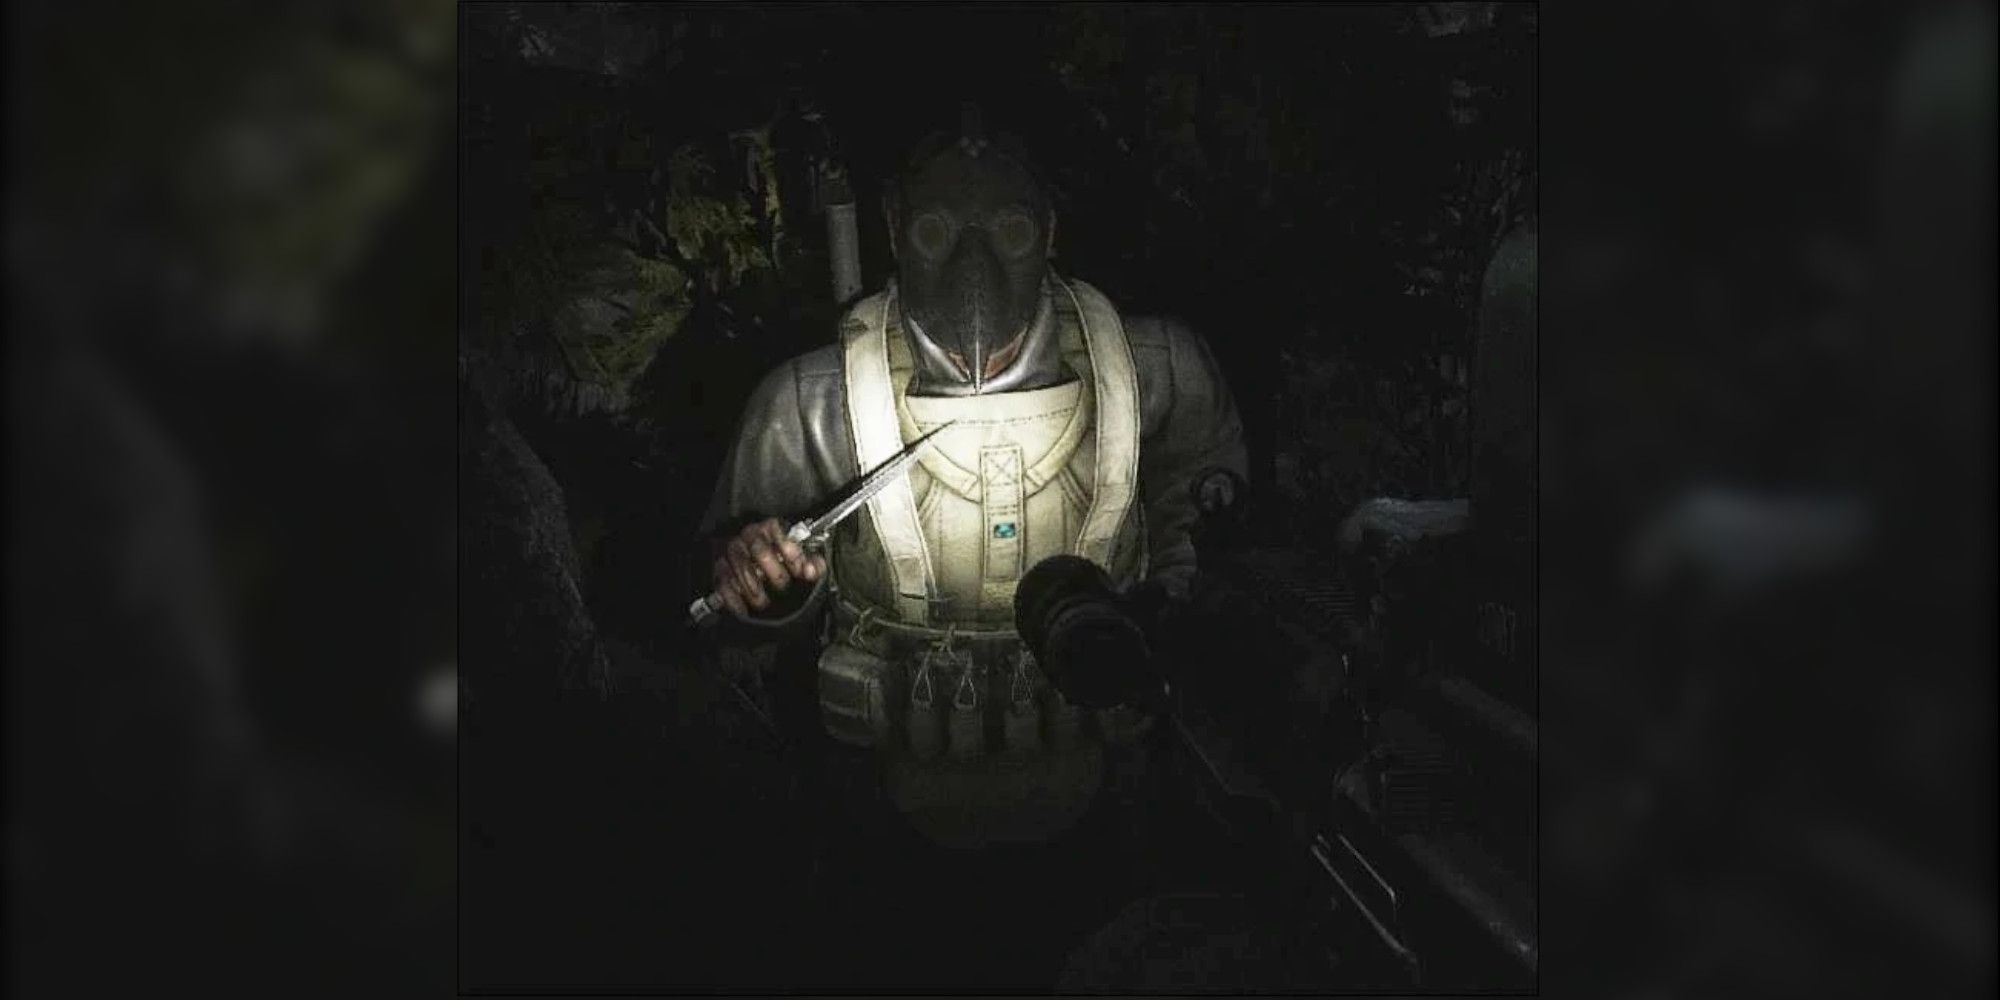 A cultist charges with a knife in the darkness